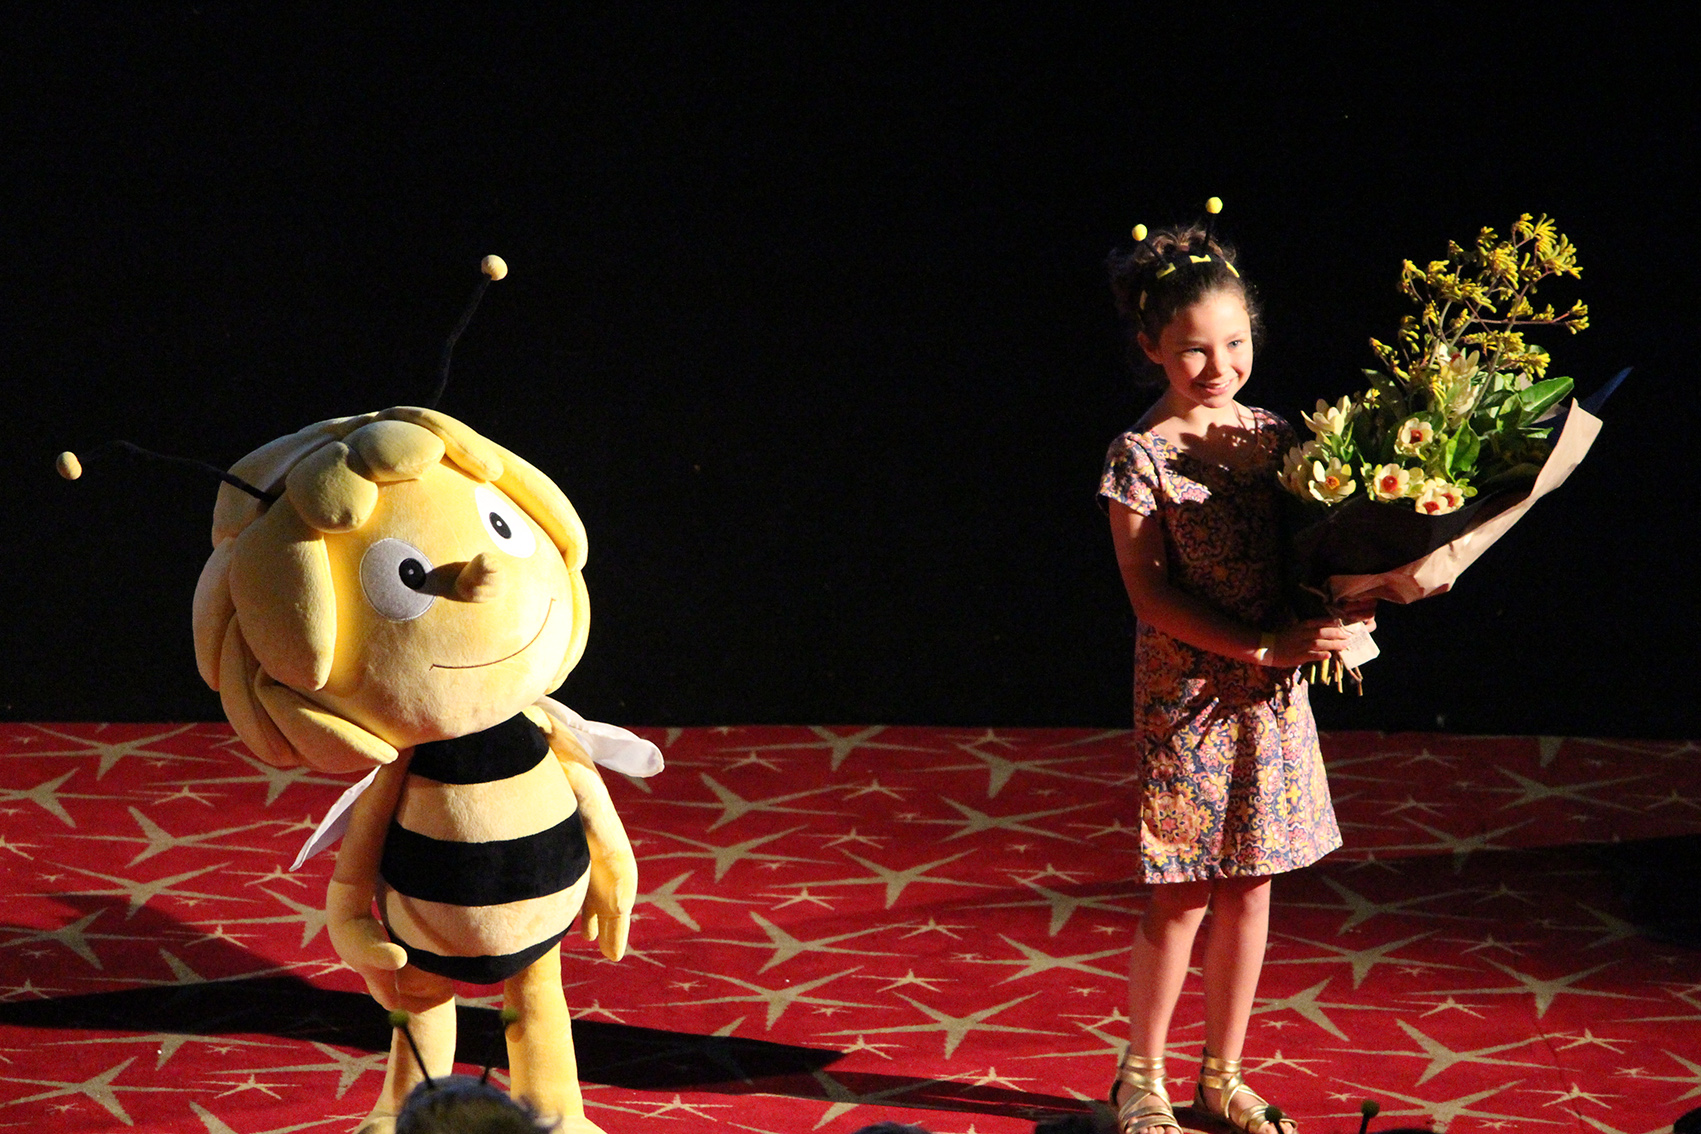 Coco Jack Gillies at the Australian premiere of Maya the Bee Movie, Sydney - 19 Oct 2014.